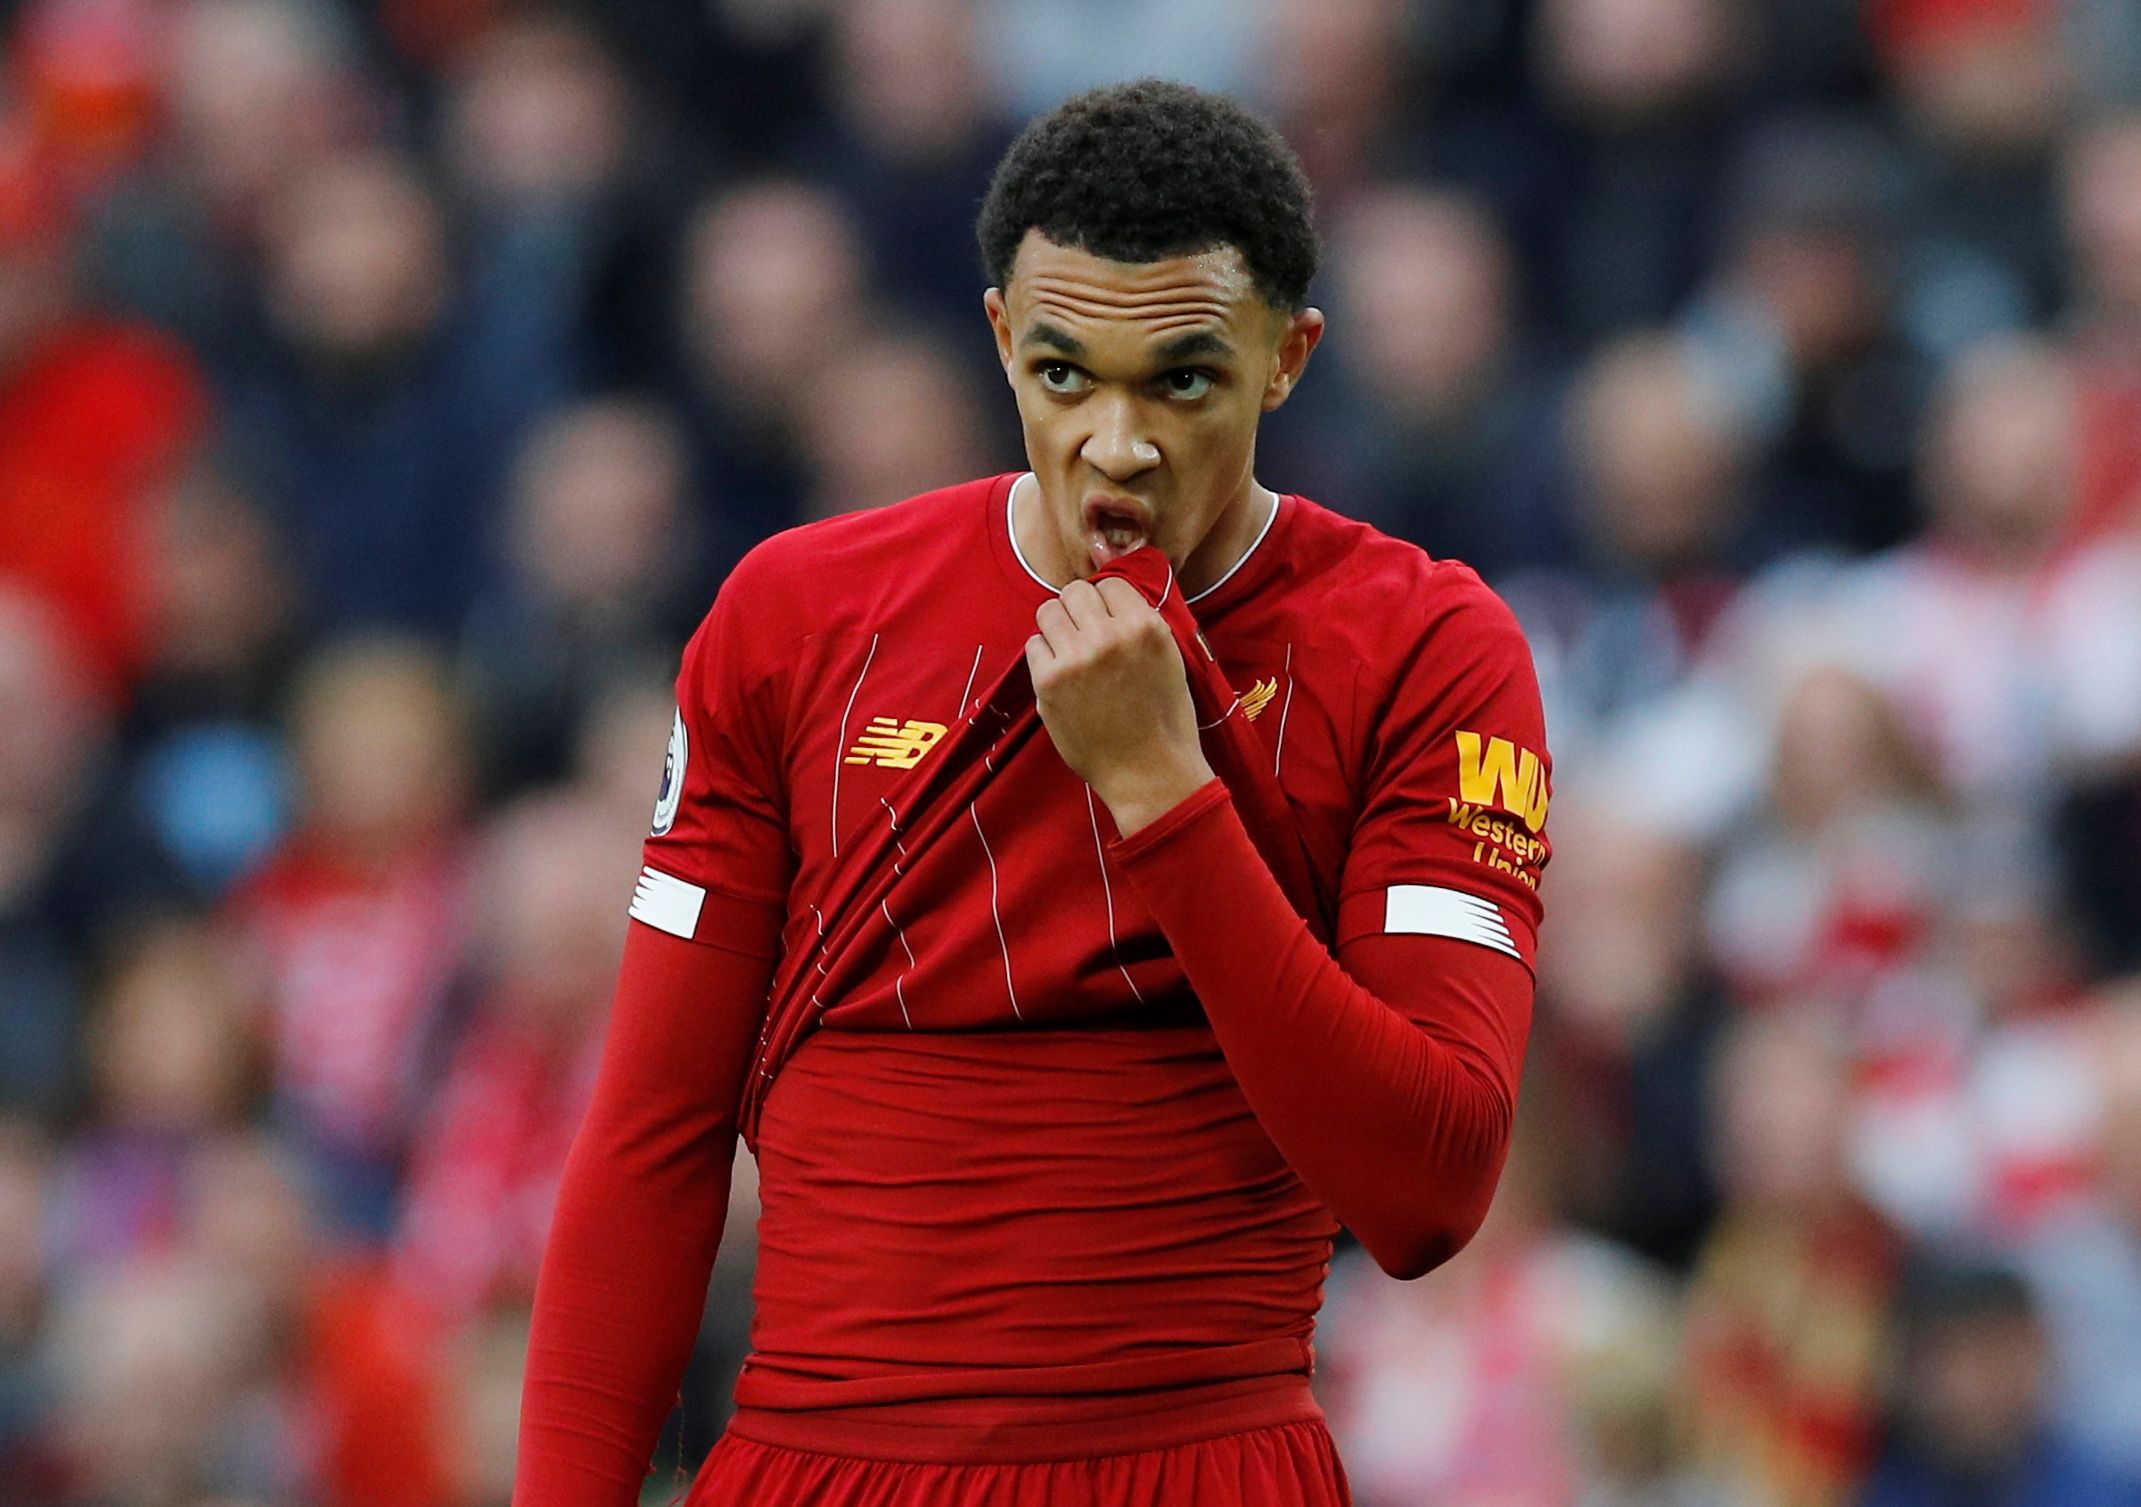 Soccer Football - Premier League - Liverpool v Leicester City - Anfield, Liverpool, Britain - October 5, 2019  Liverpool's Trent Alexander-Arnold looks on  REUTERS/Phil Noble  EDITORIAL USE ONLY. No use with unauthorized audio, video, data, fixture lists, club/league logos or 